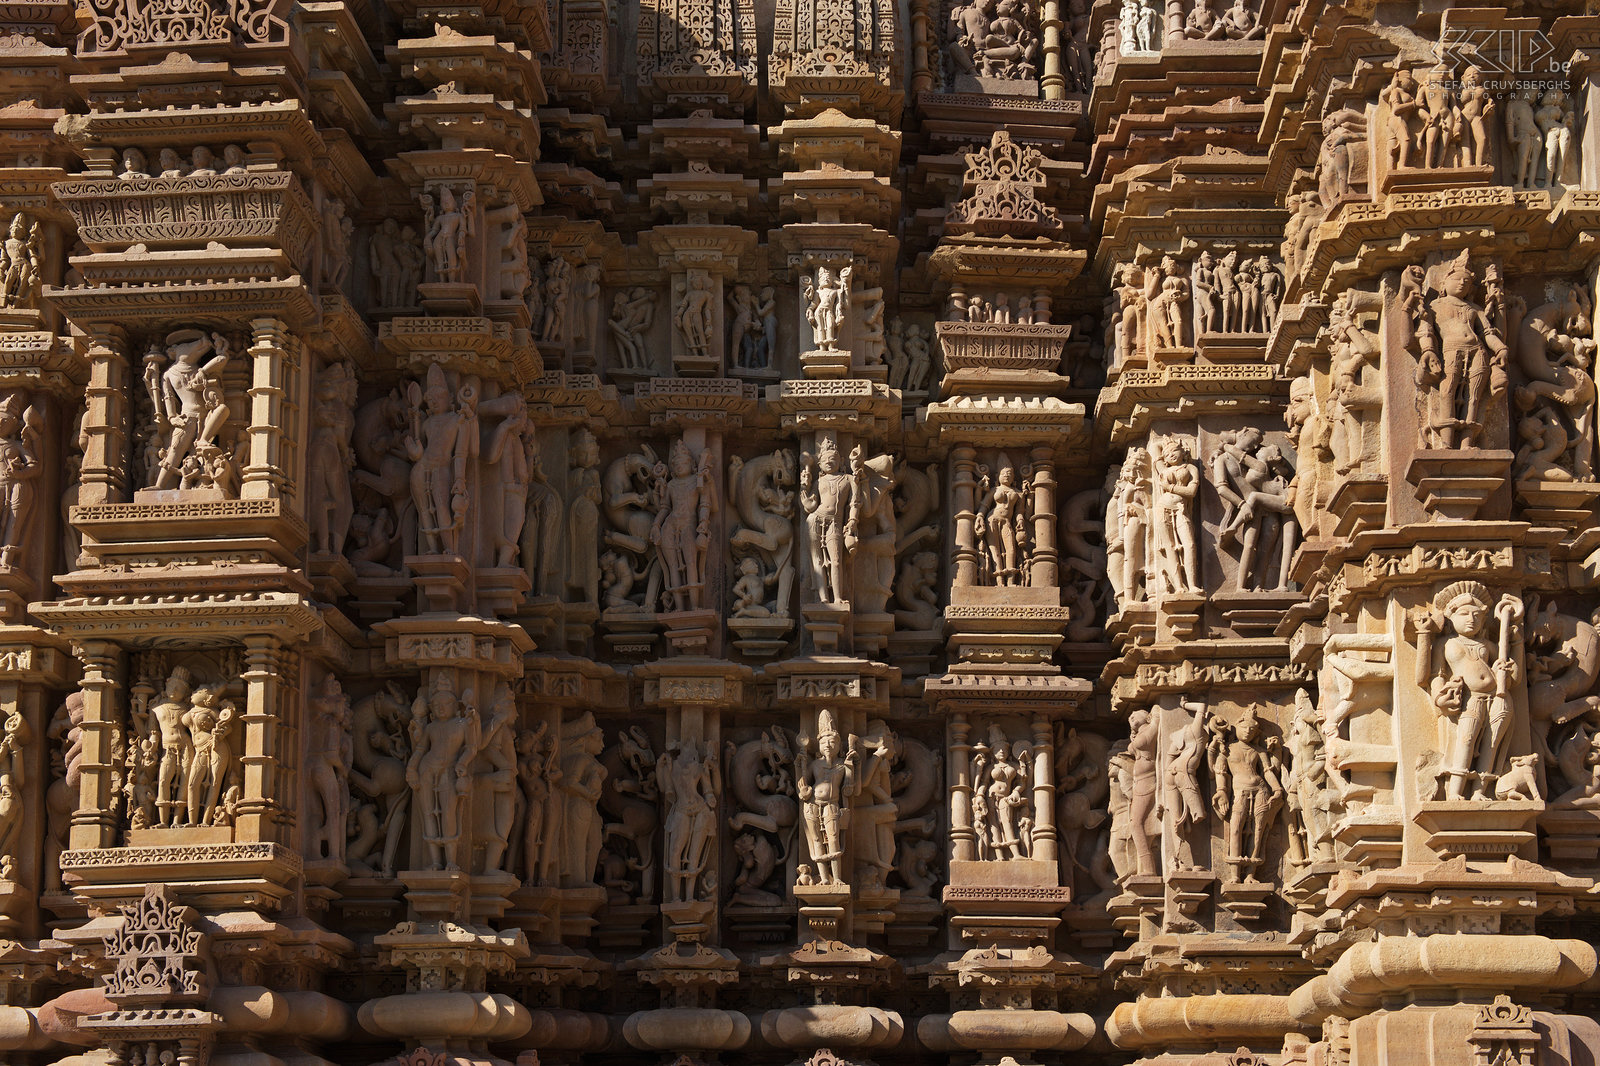 Khajuraho - Kandariya-Mahadev temple The beautiful and numerous sculptures of the temples of Khajuraho are a celebration of life in all its facets. Stefan Cruysberghs